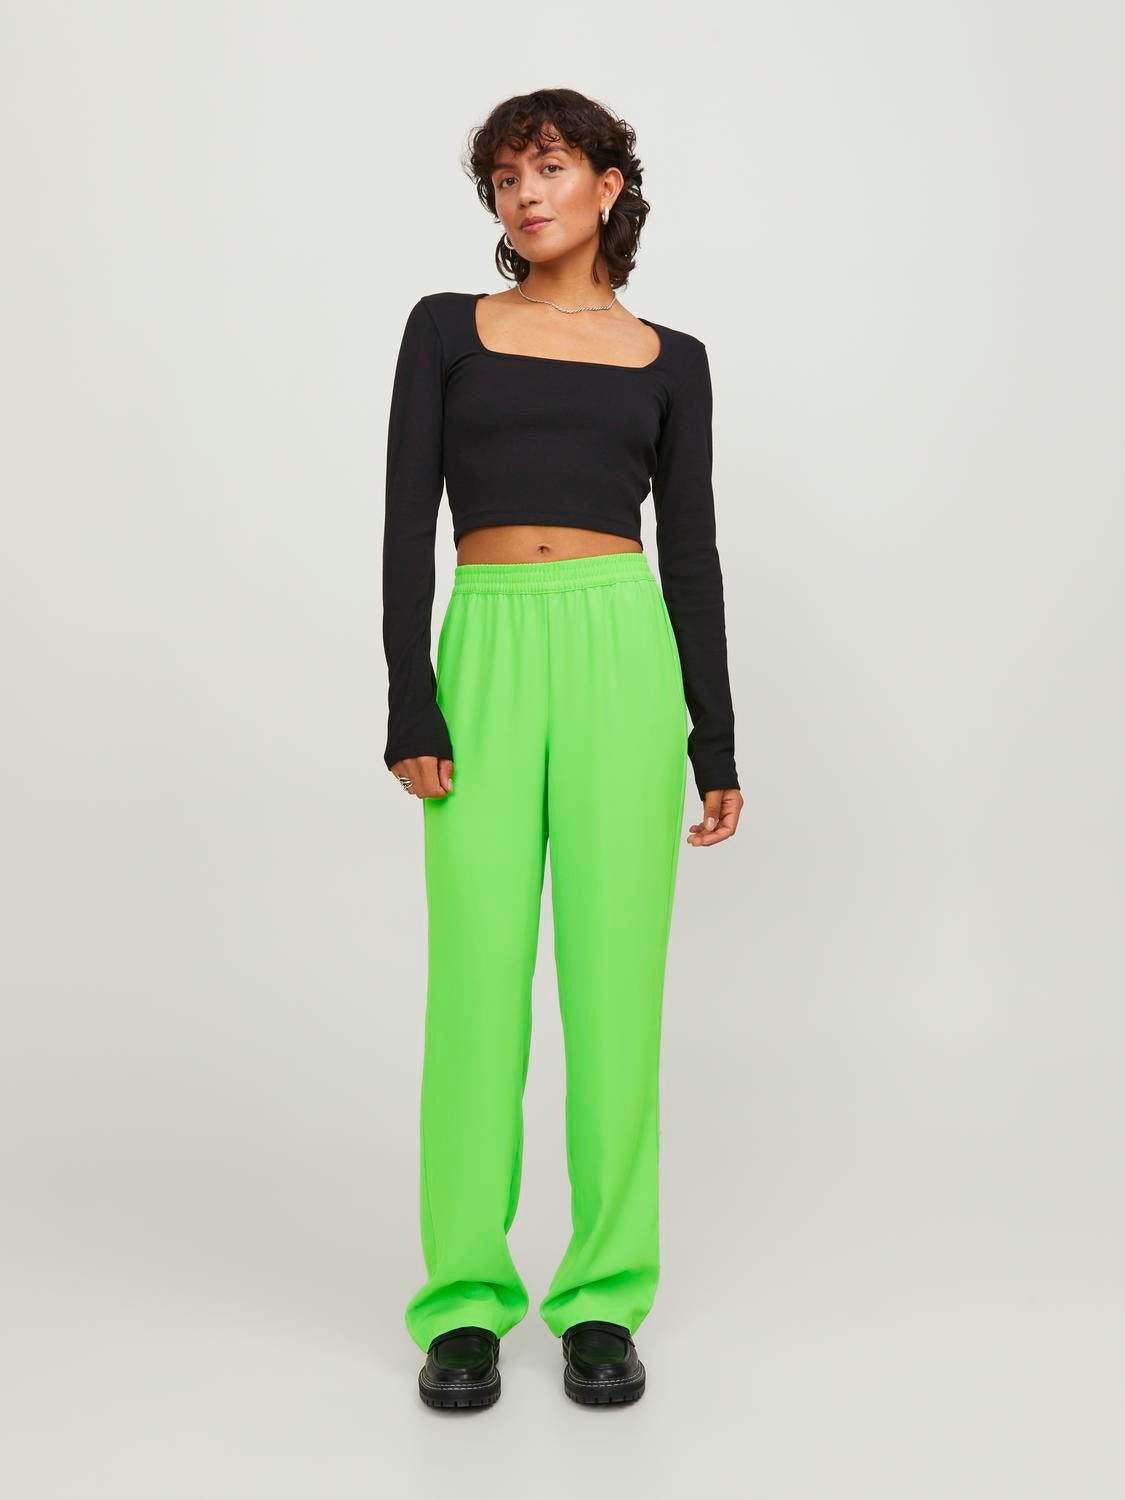 JXPOPPY Classic trousers